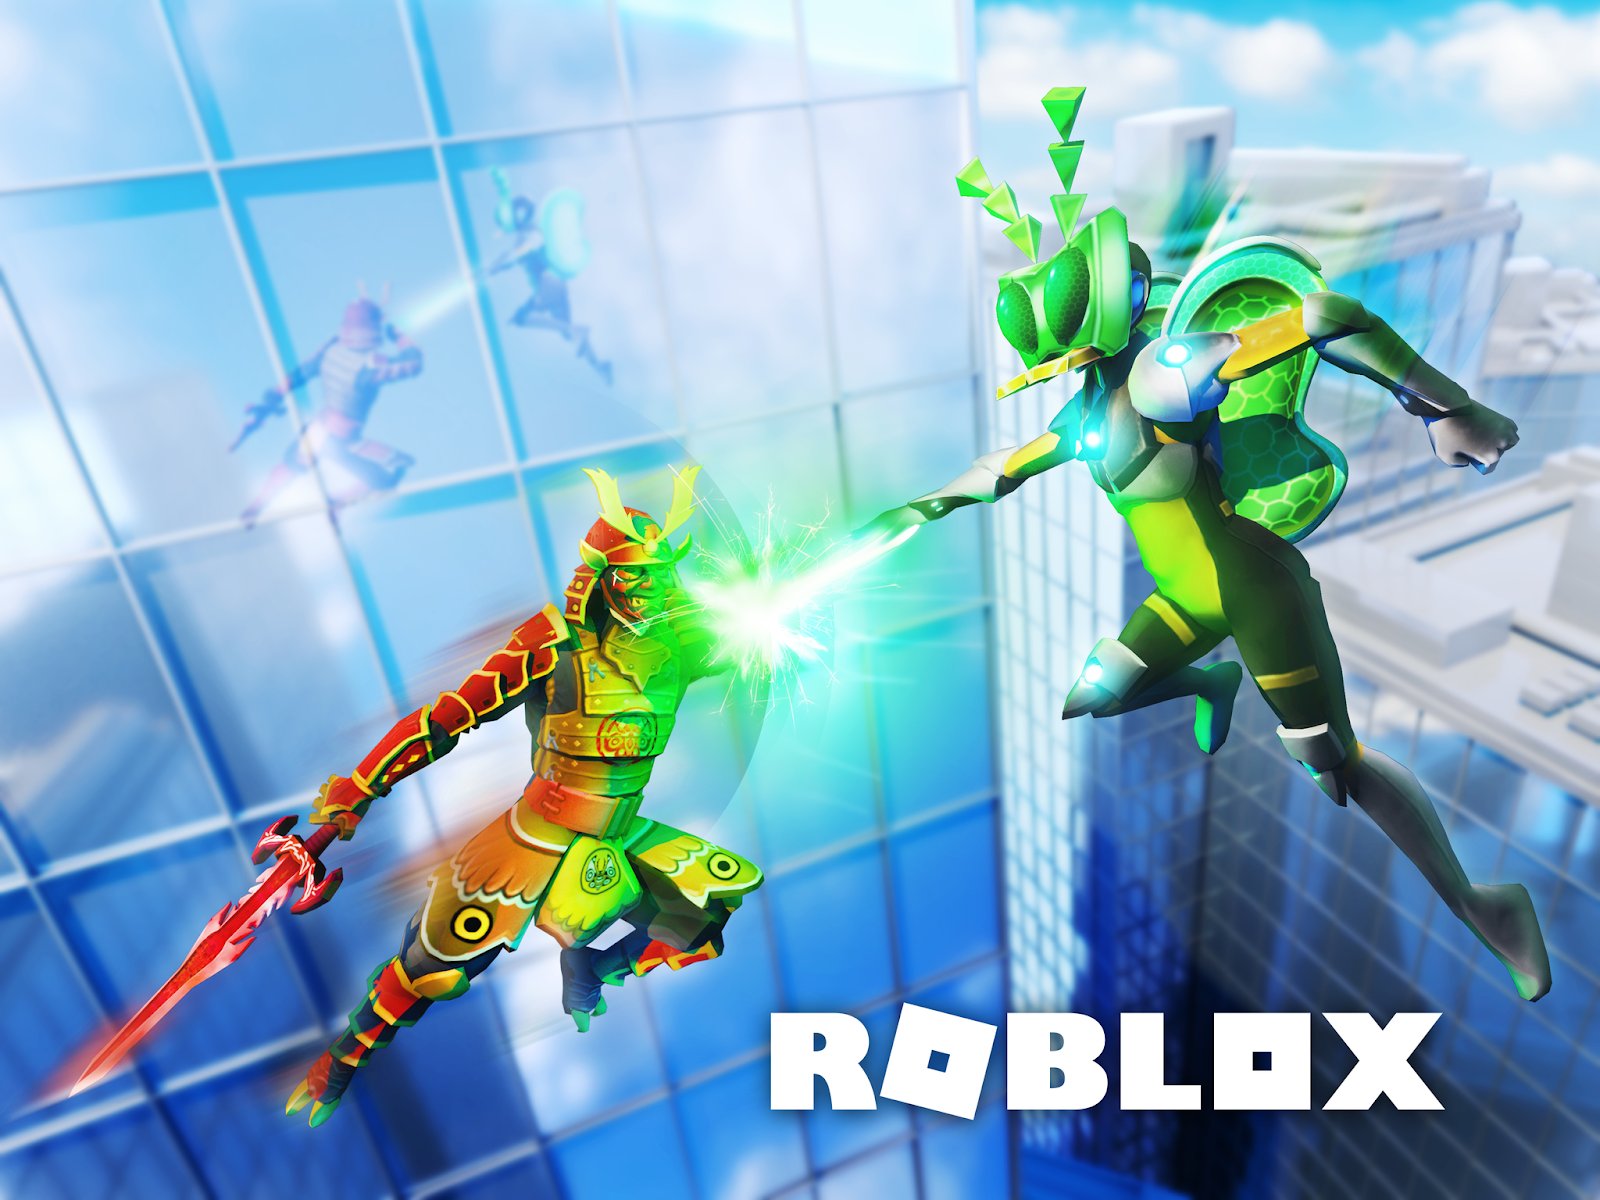 Roblox On Twitter Christmas Came Early For Chromebook Players